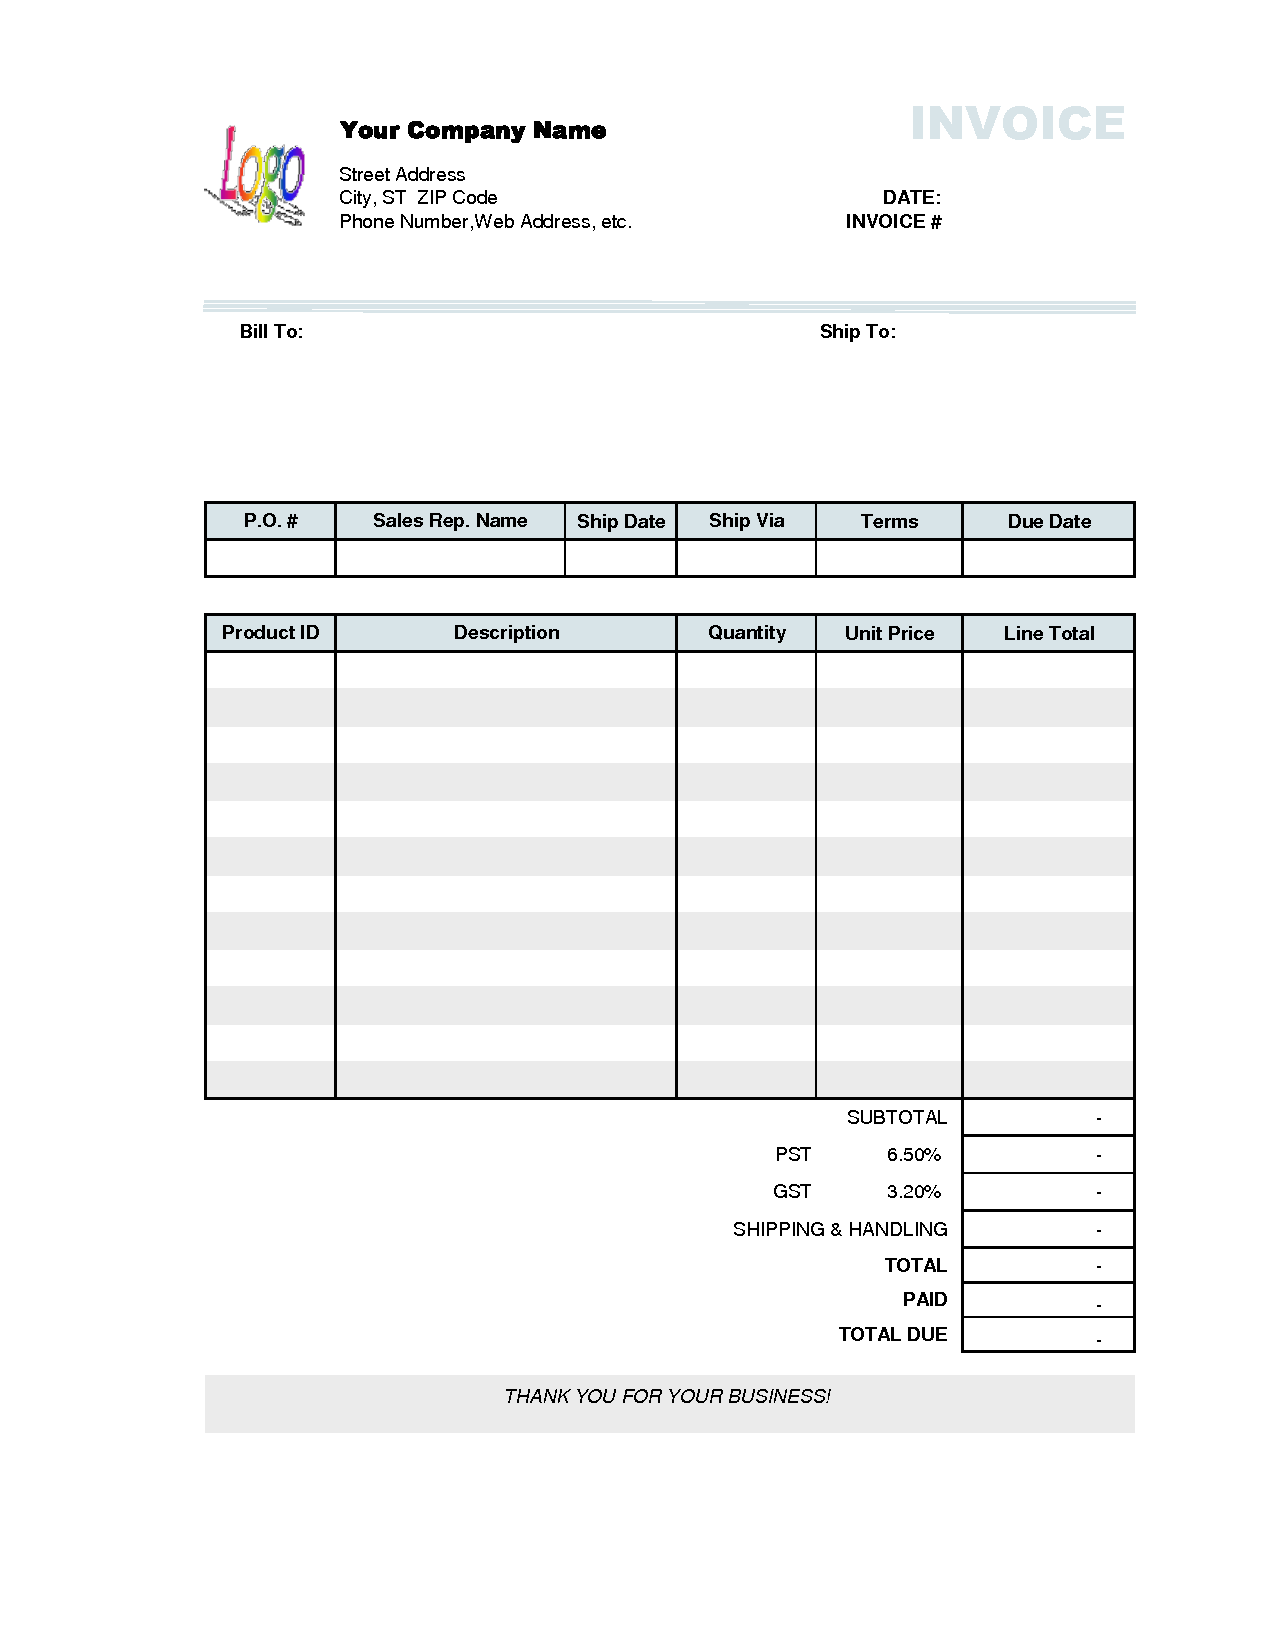 Microsoft Invoice Office Templates Db excel